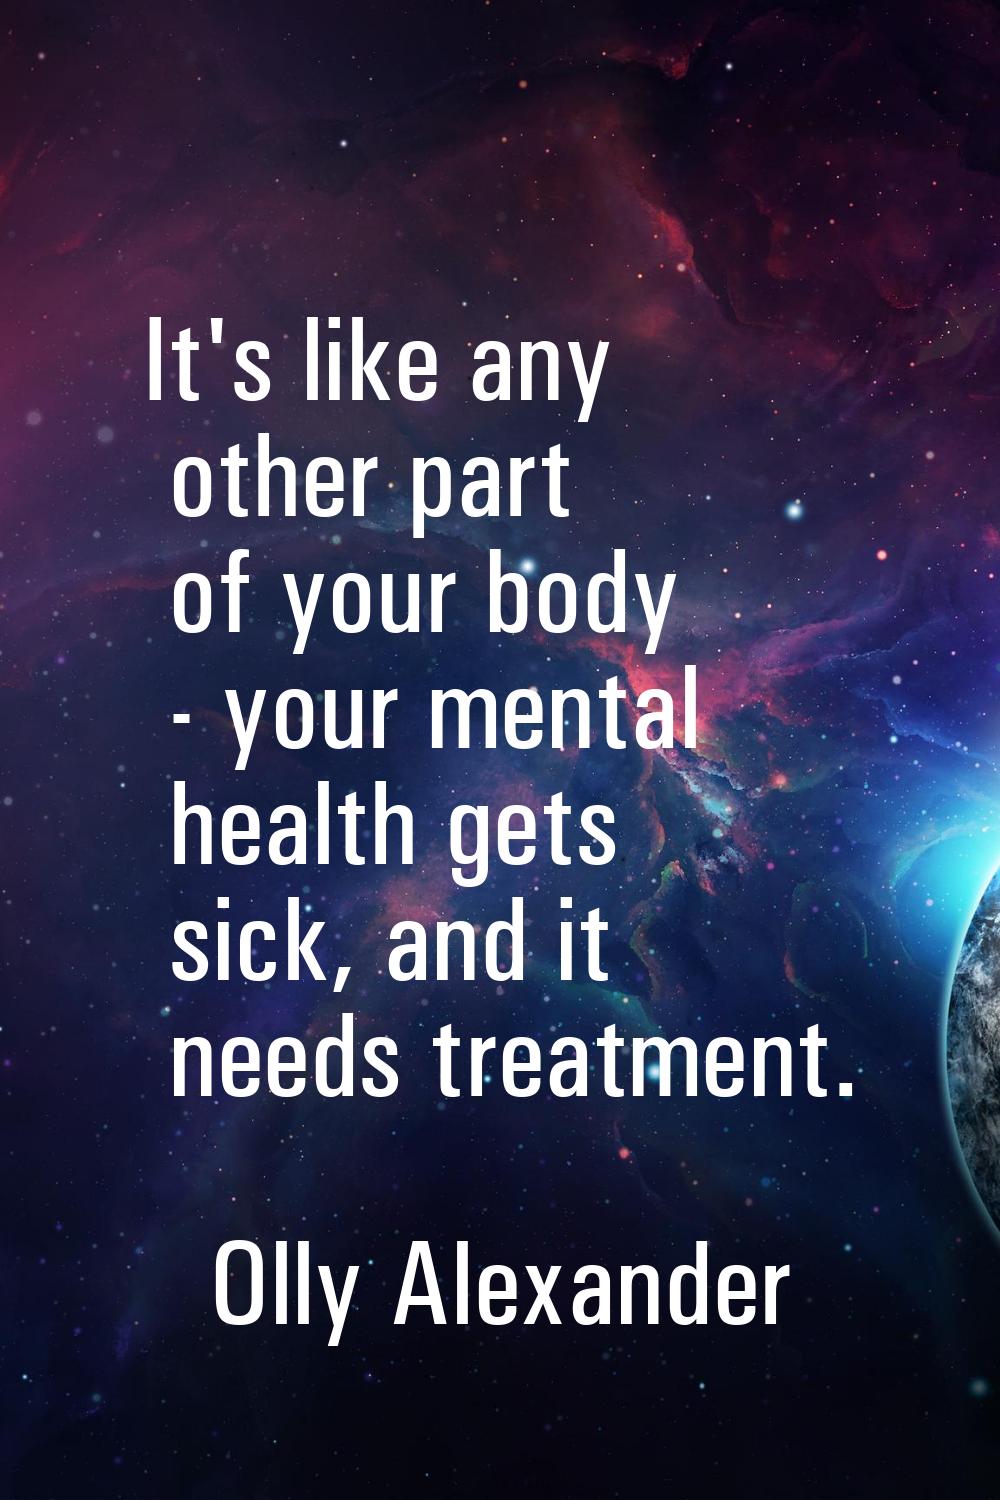 It's like any other part of your body - your mental health gets sick, and it needs treatment.